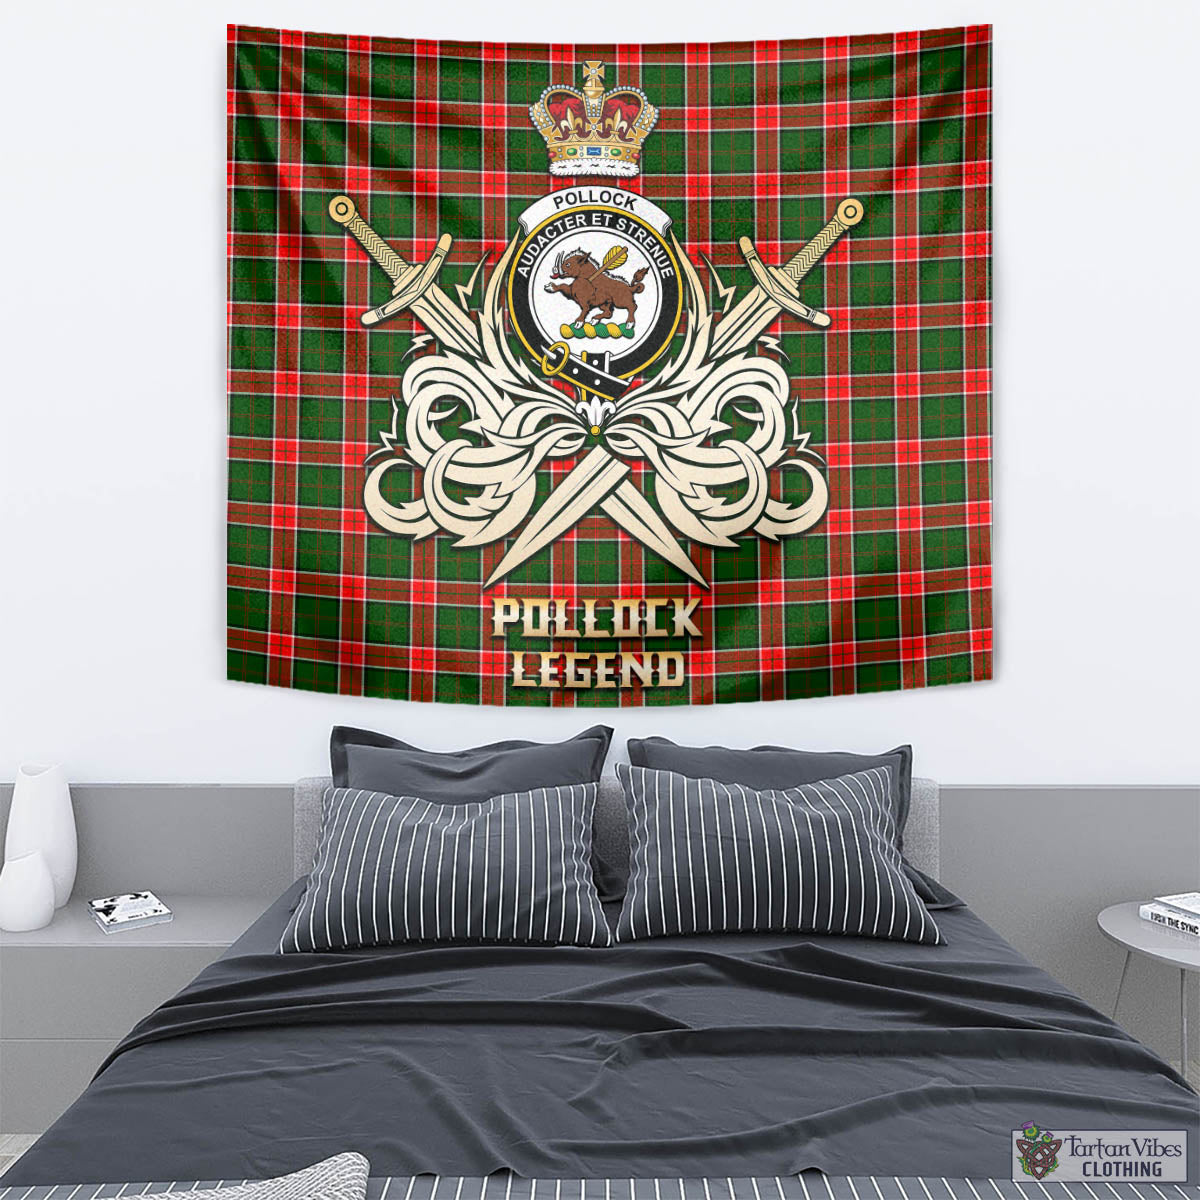 Tartan Vibes Clothing Pollock Modern Tartan Tapestry with Clan Crest and the Golden Sword of Courageous Legacy